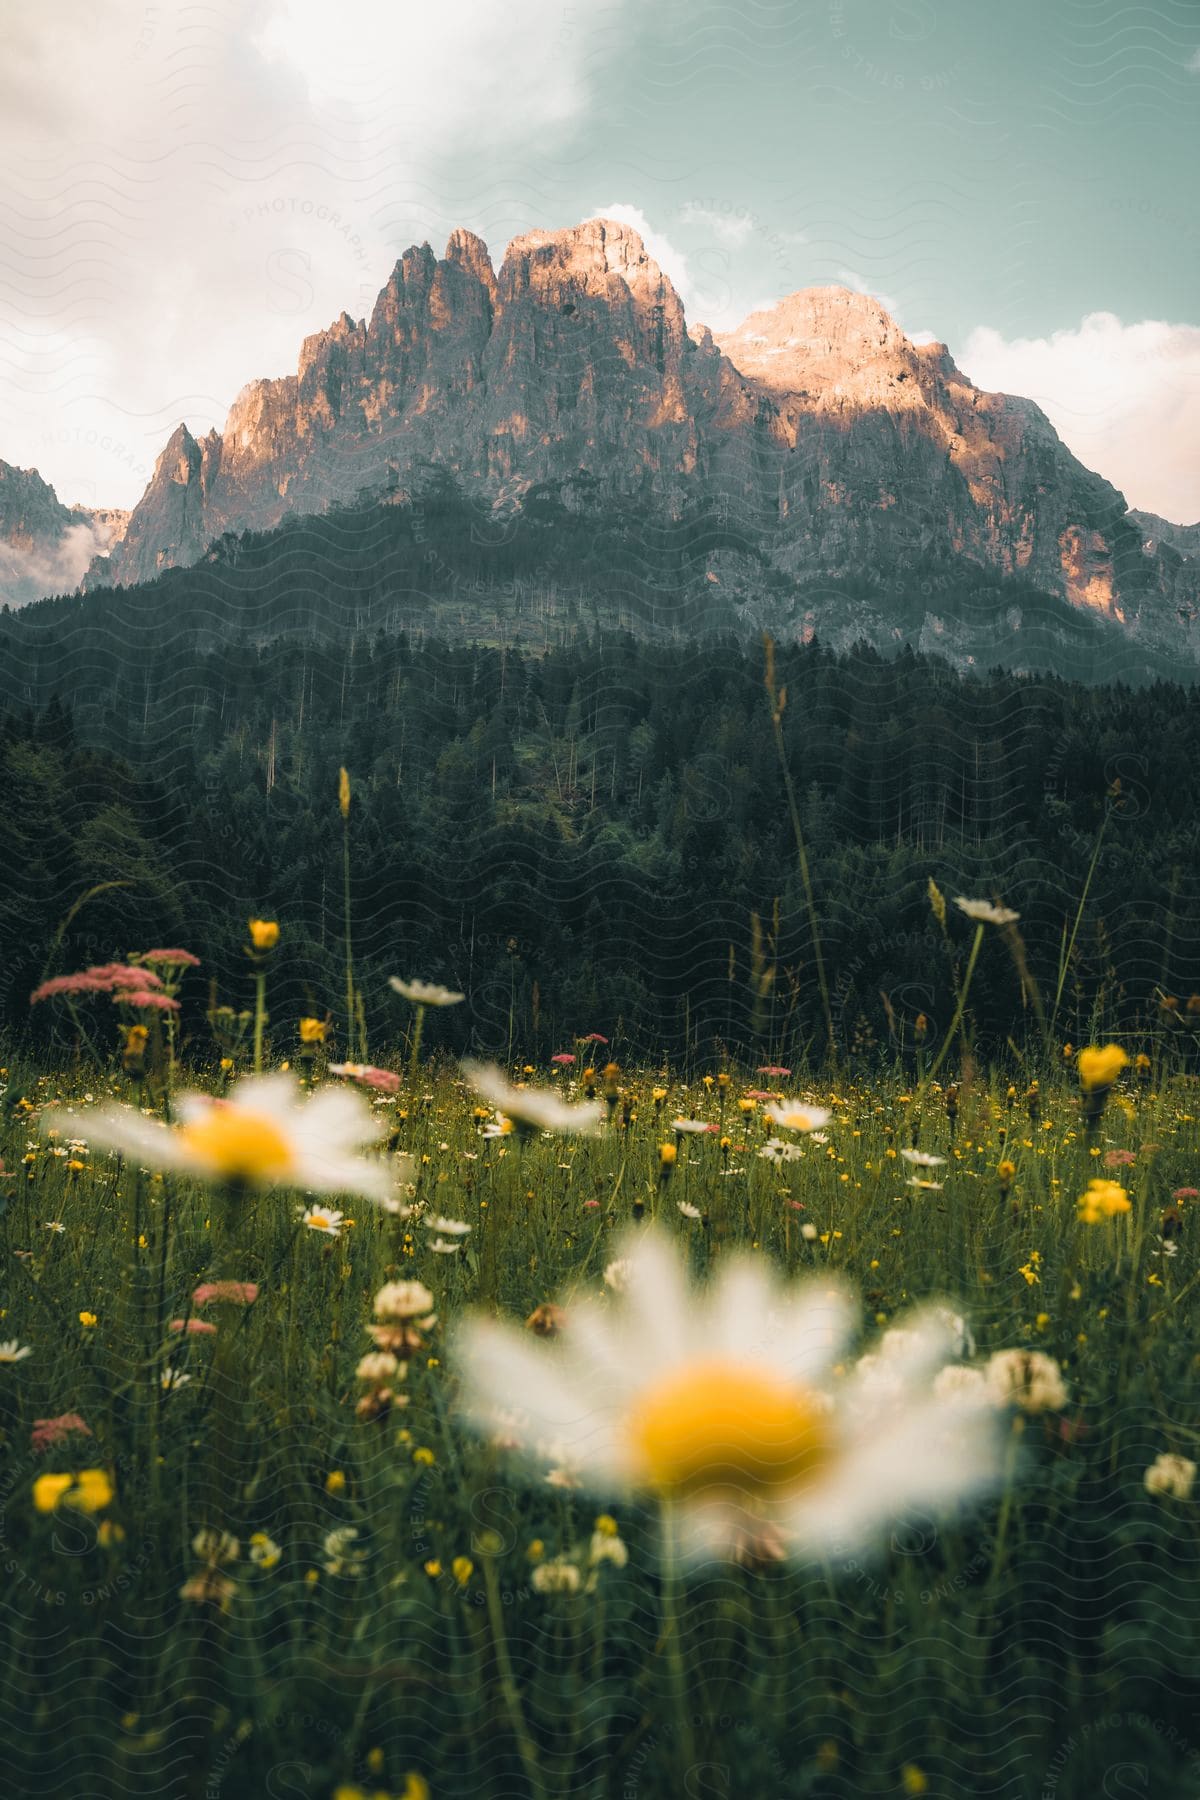 Landscape of a field with common daisy and background rocky mountain ranges with cliffs